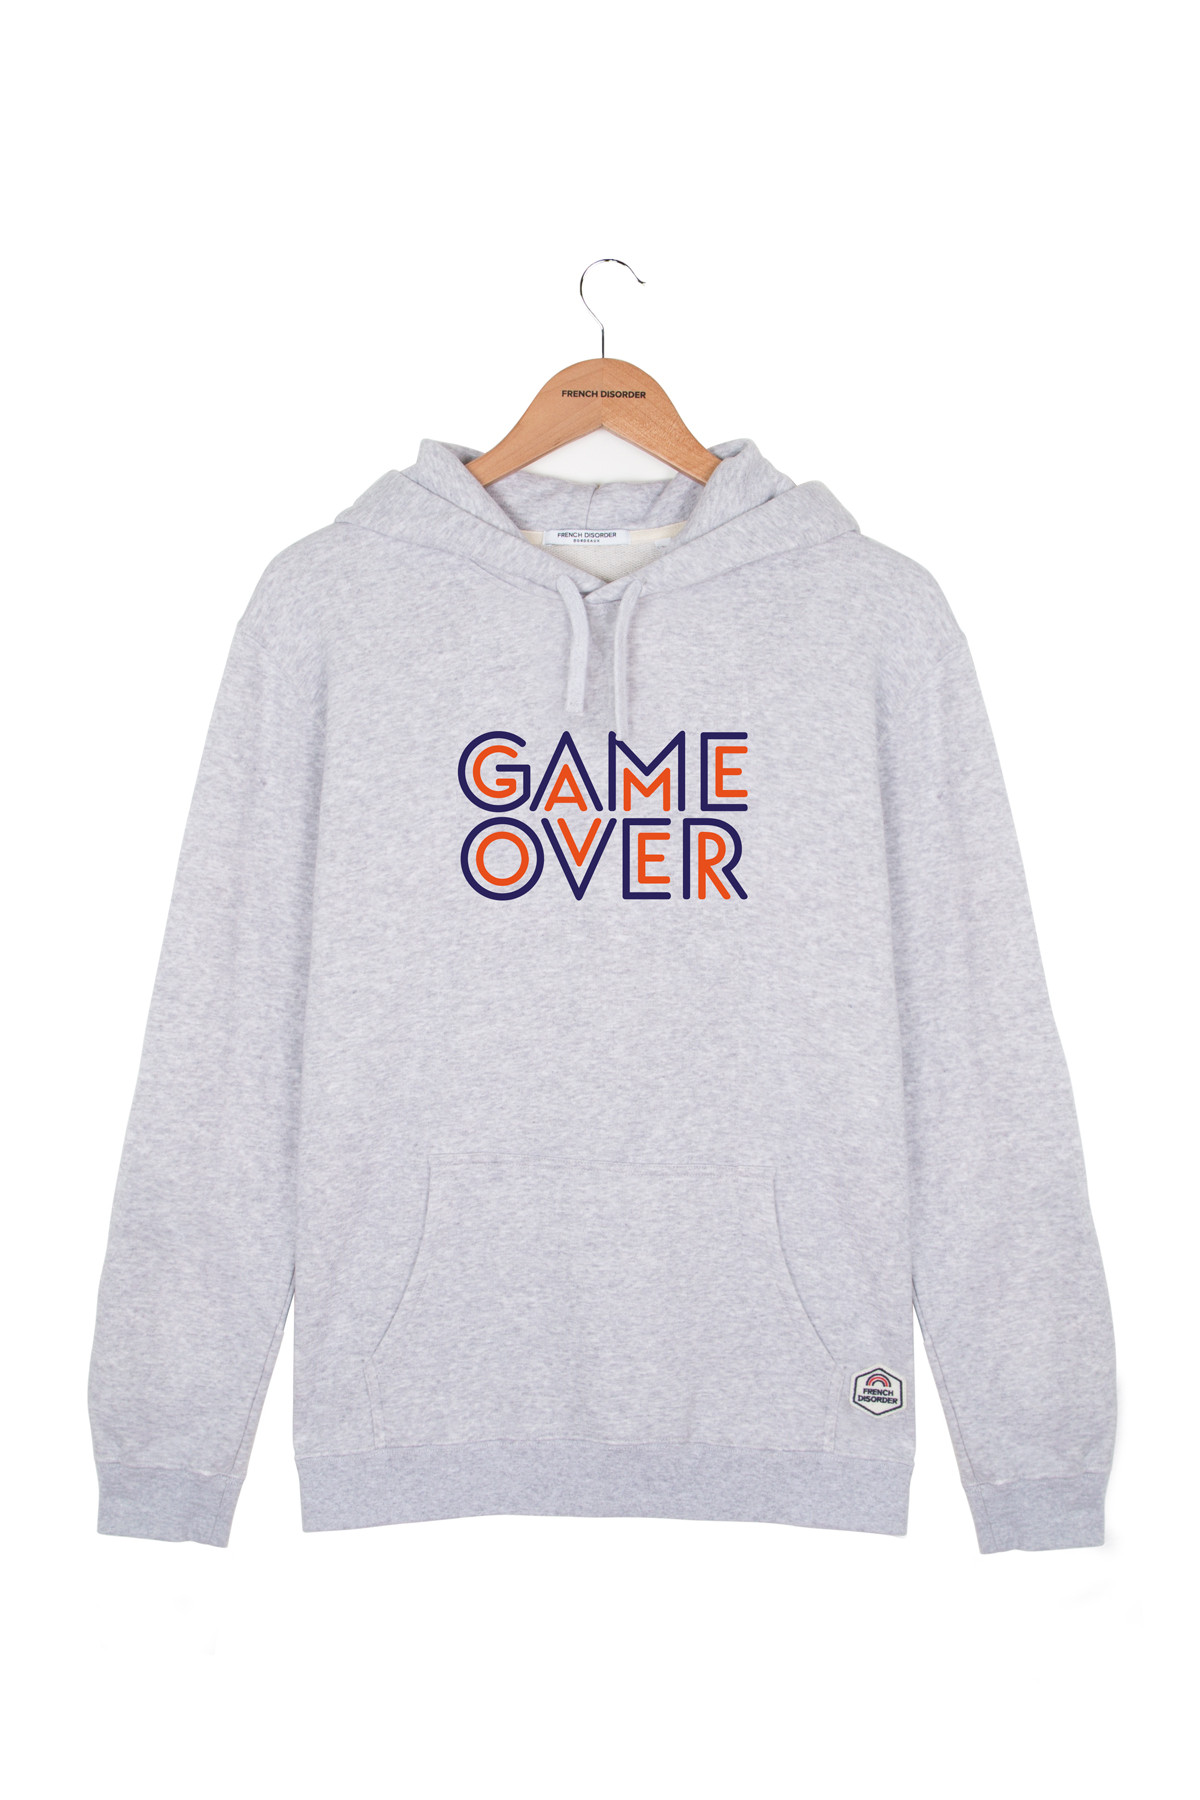 Photo de SWEATS À CAPUCHE Hoodie GAME OVER chez French Disorder